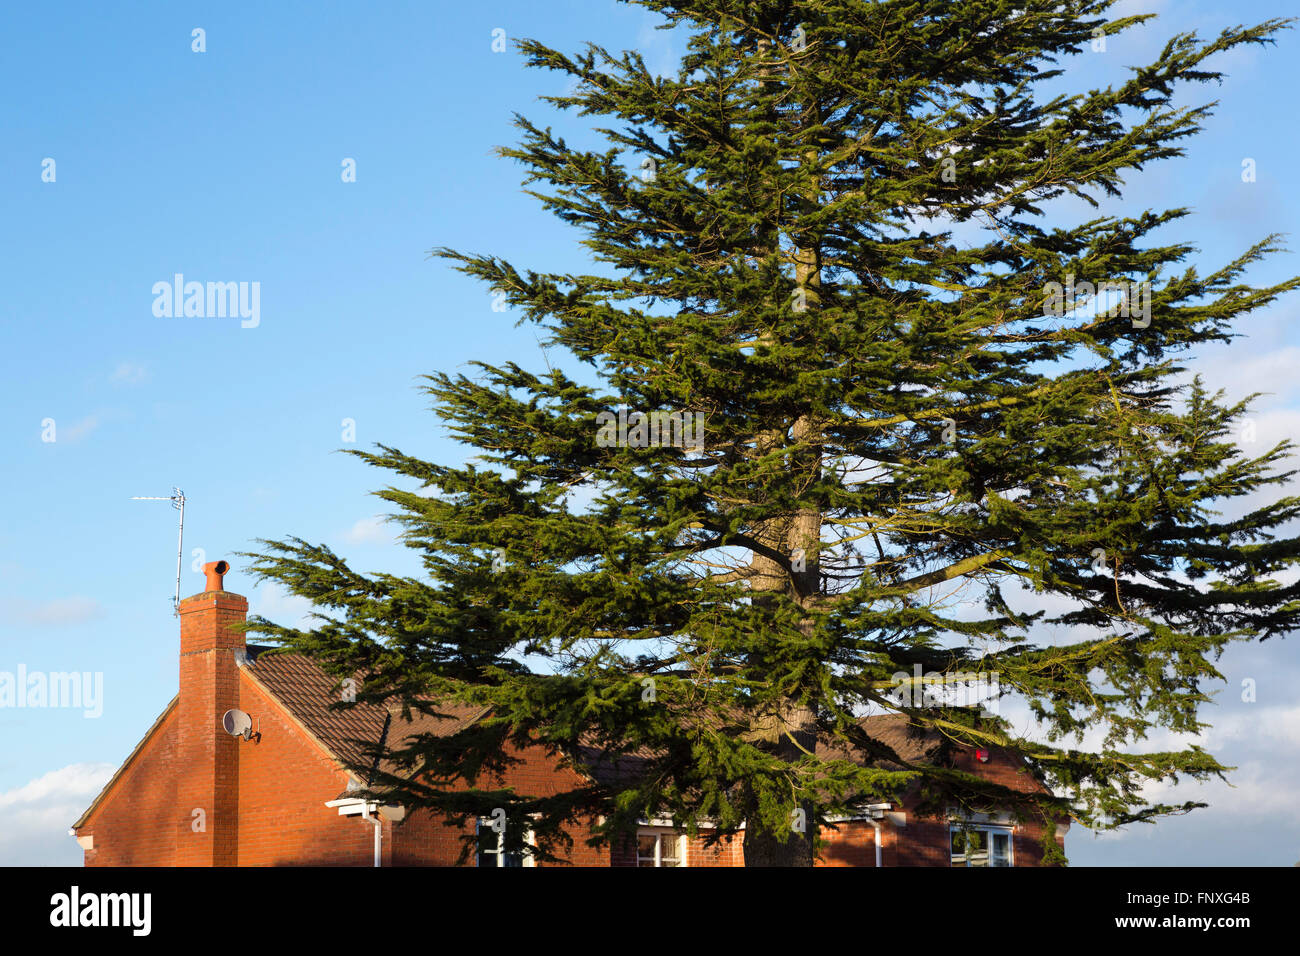 A large pine like tree in front of houses on an estate in the UK. Stock Photo